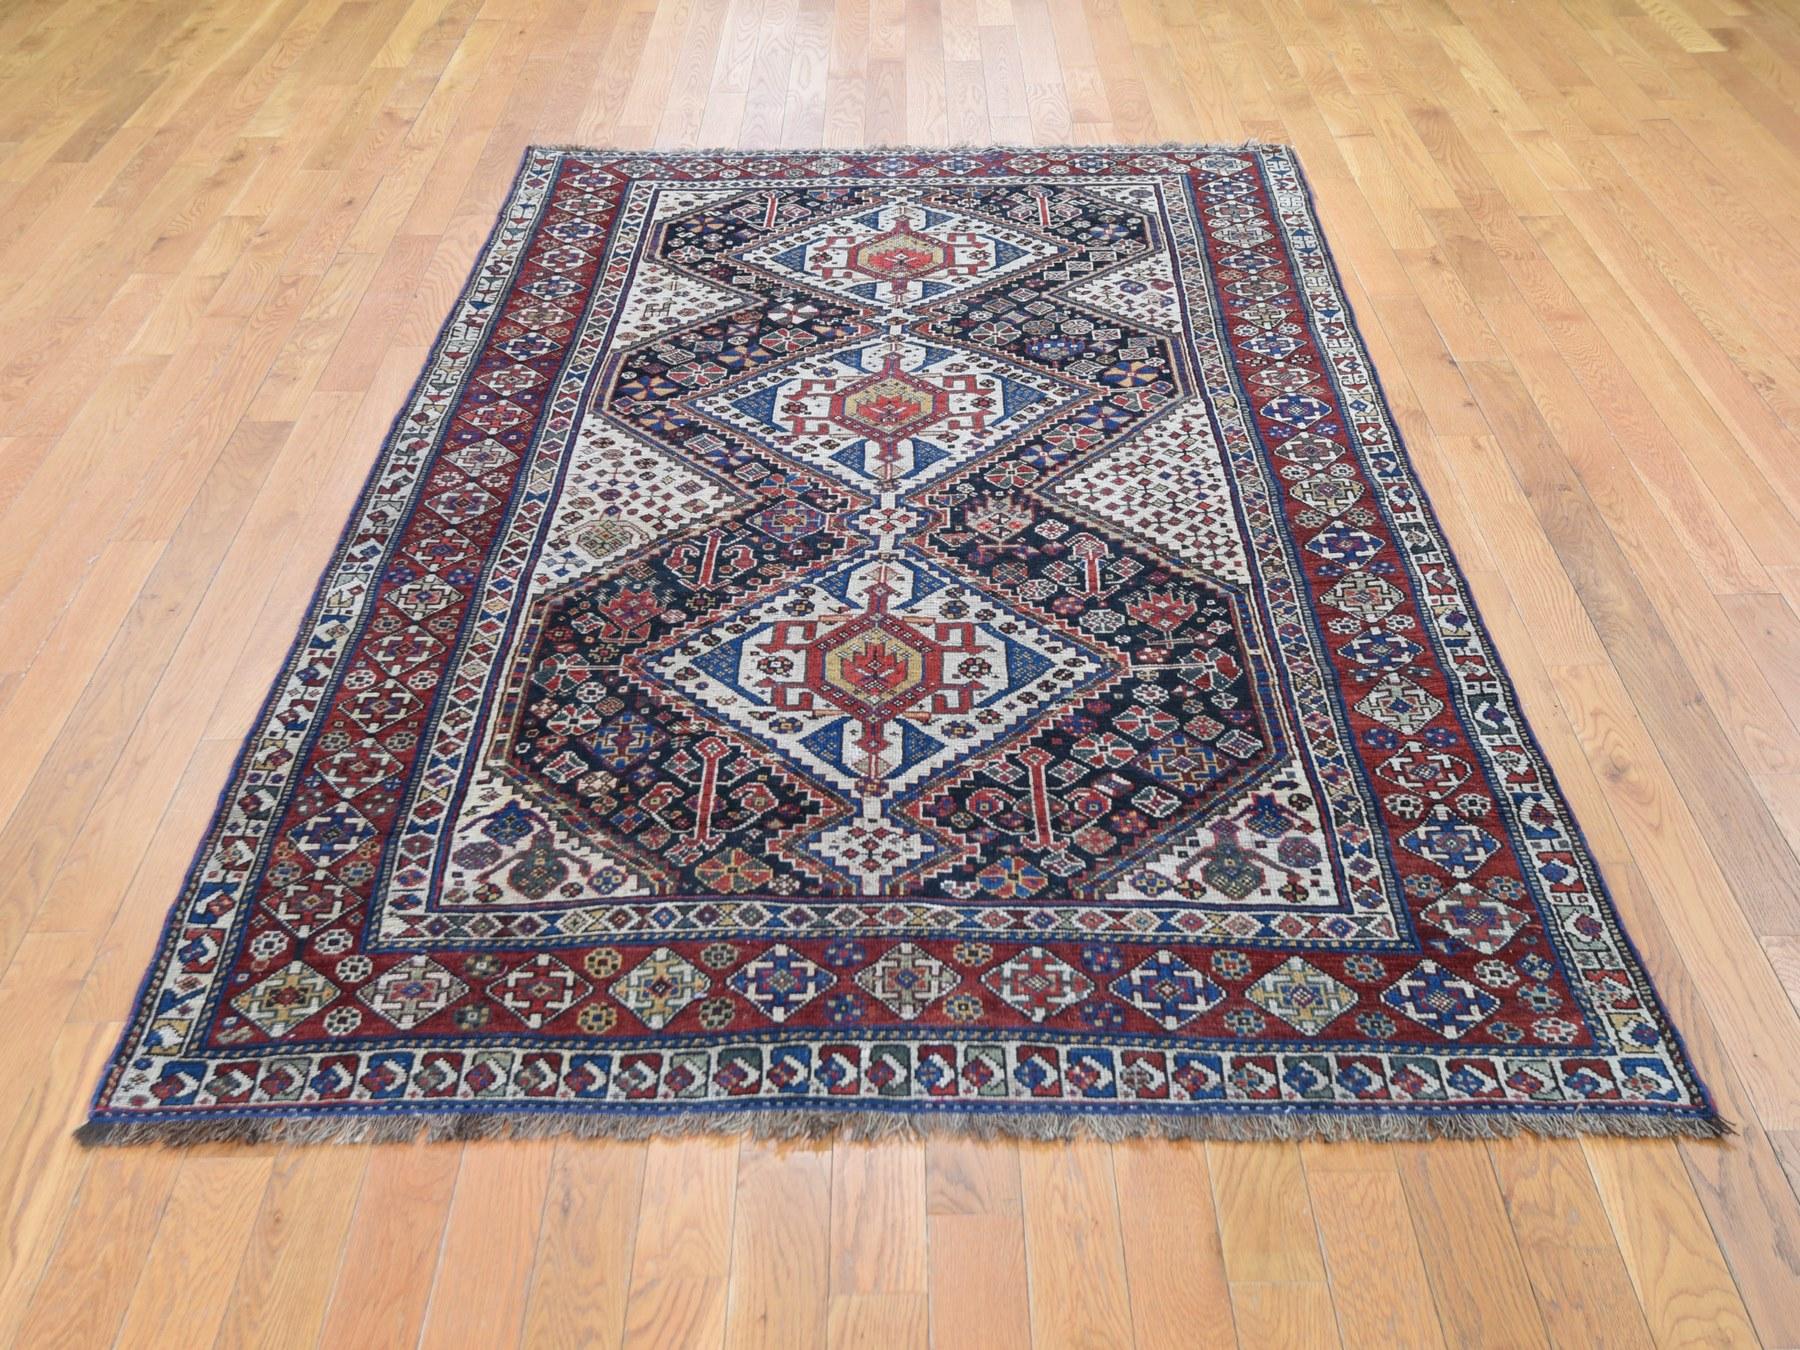 This is a truly genuine one of a kind antique Persian Qasqui tribal geometric even wear hand knotted rug. It has been knotted for months and months in the centuries-old Persian weaving craftsmanship techniques by expert artisans.

Origin of weaving